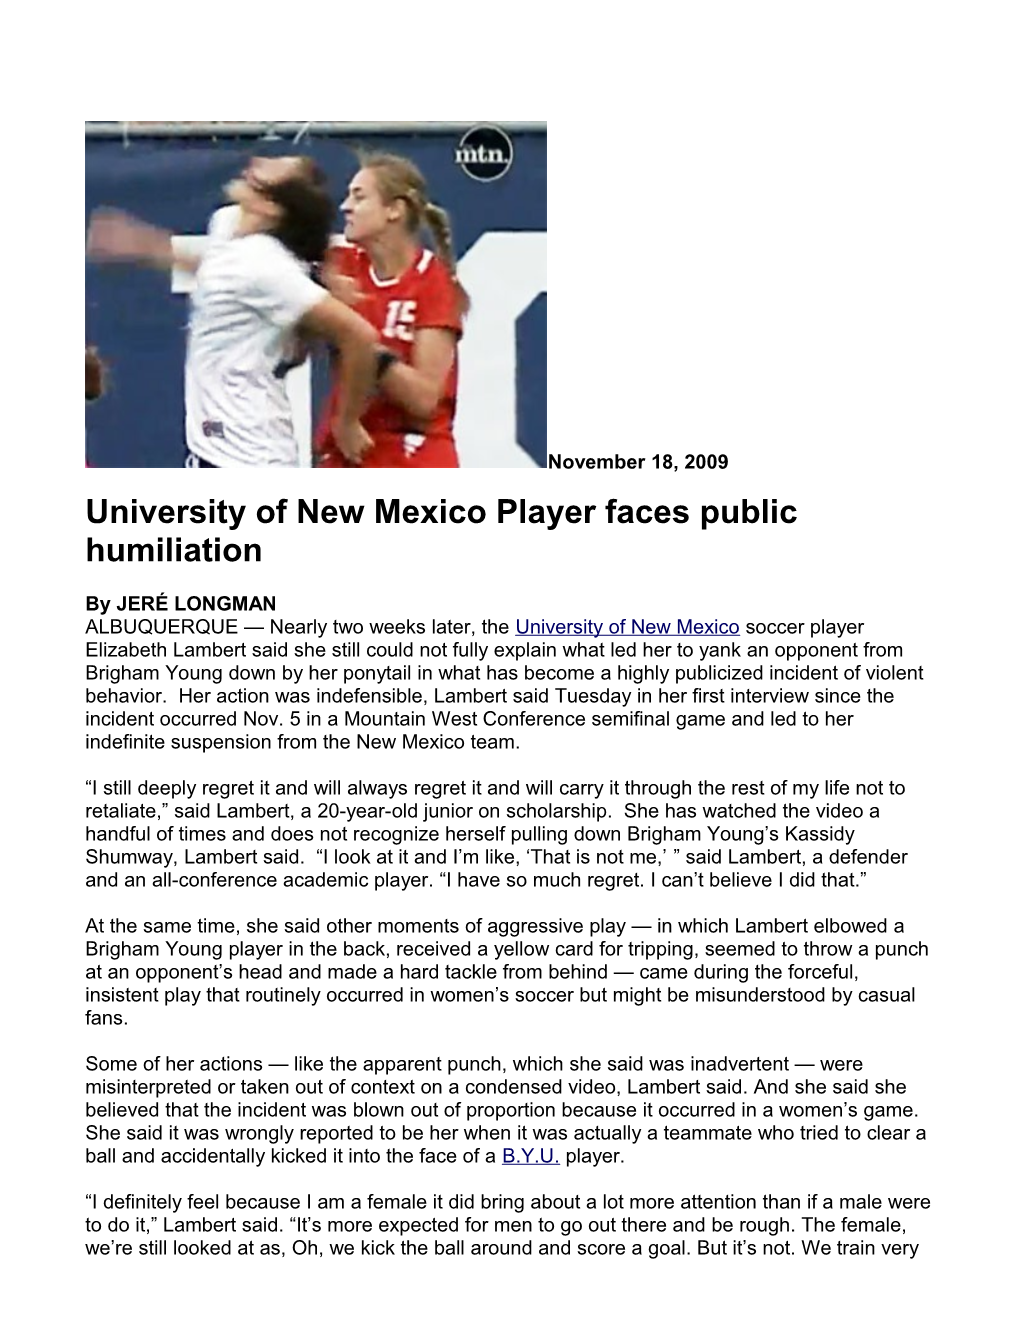 University of New Mexico Player Faces Public Humiliation